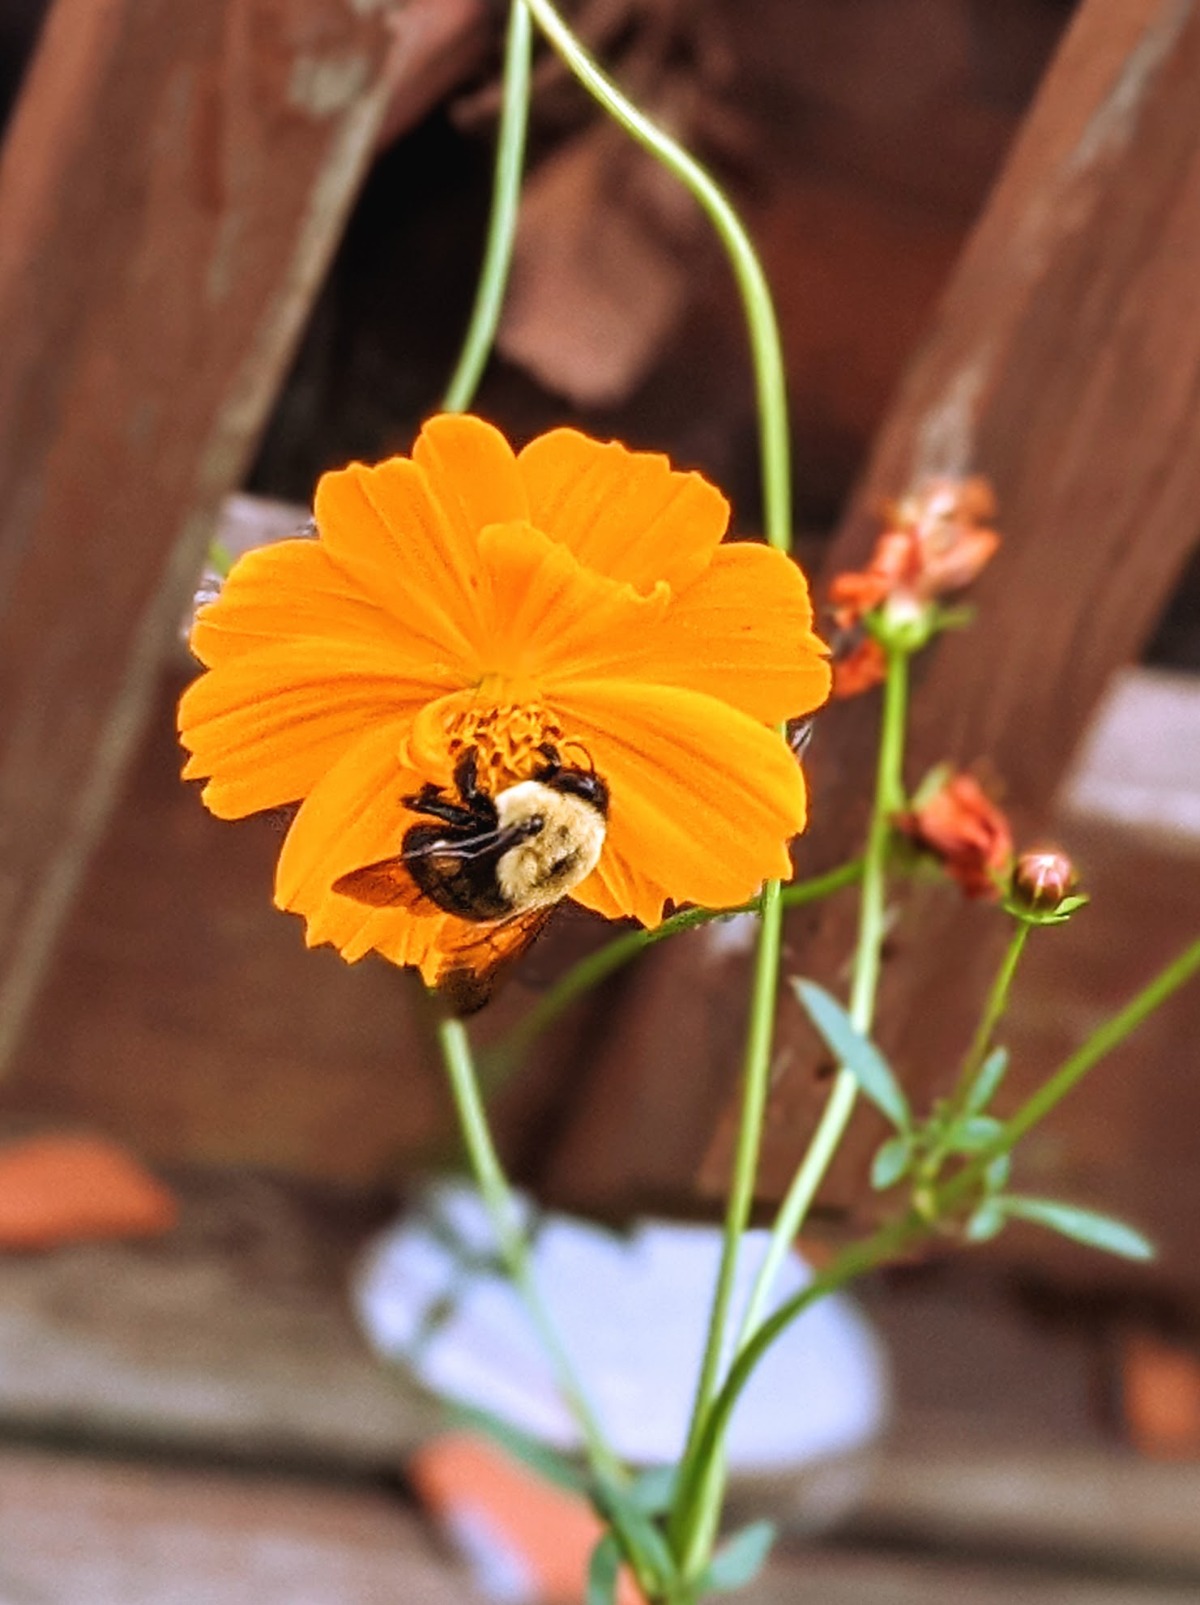 Check out this pollinator magnet orange cosmos flower